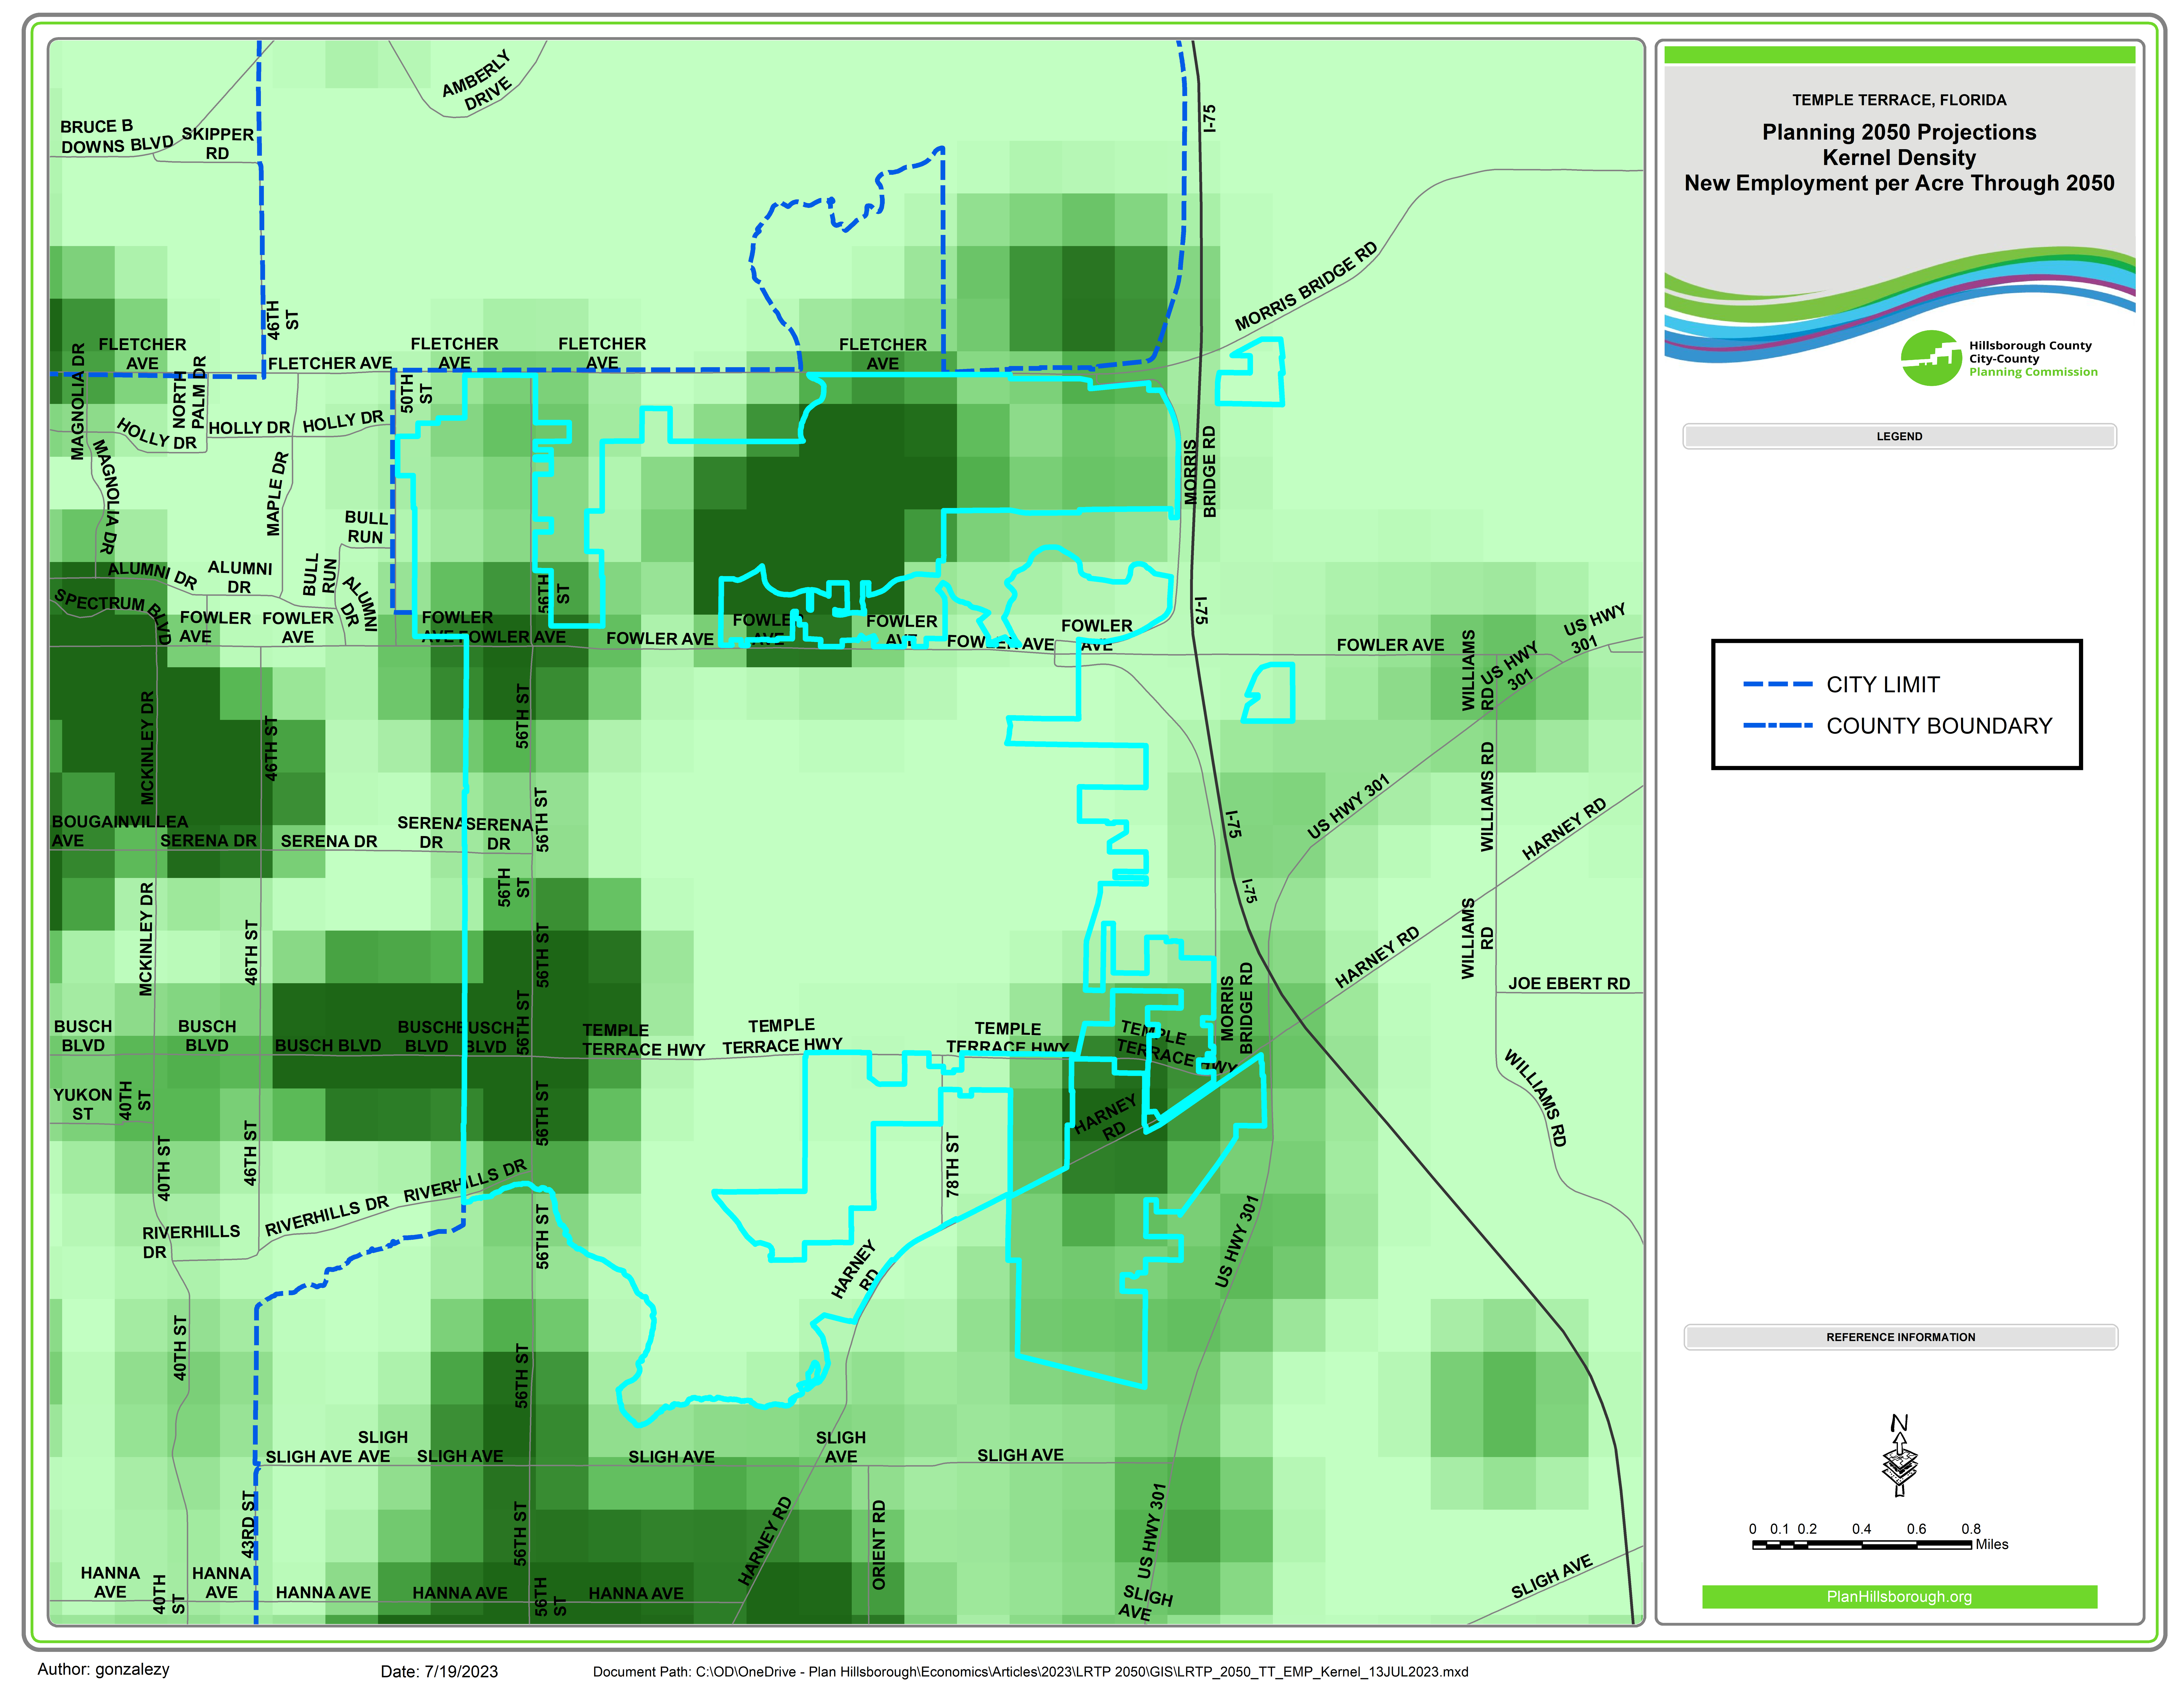 Map shows kernel density of new employment per acre through 2050 for the City of Temple Terrace. Darker green areas indicate where most new jobs will be located.